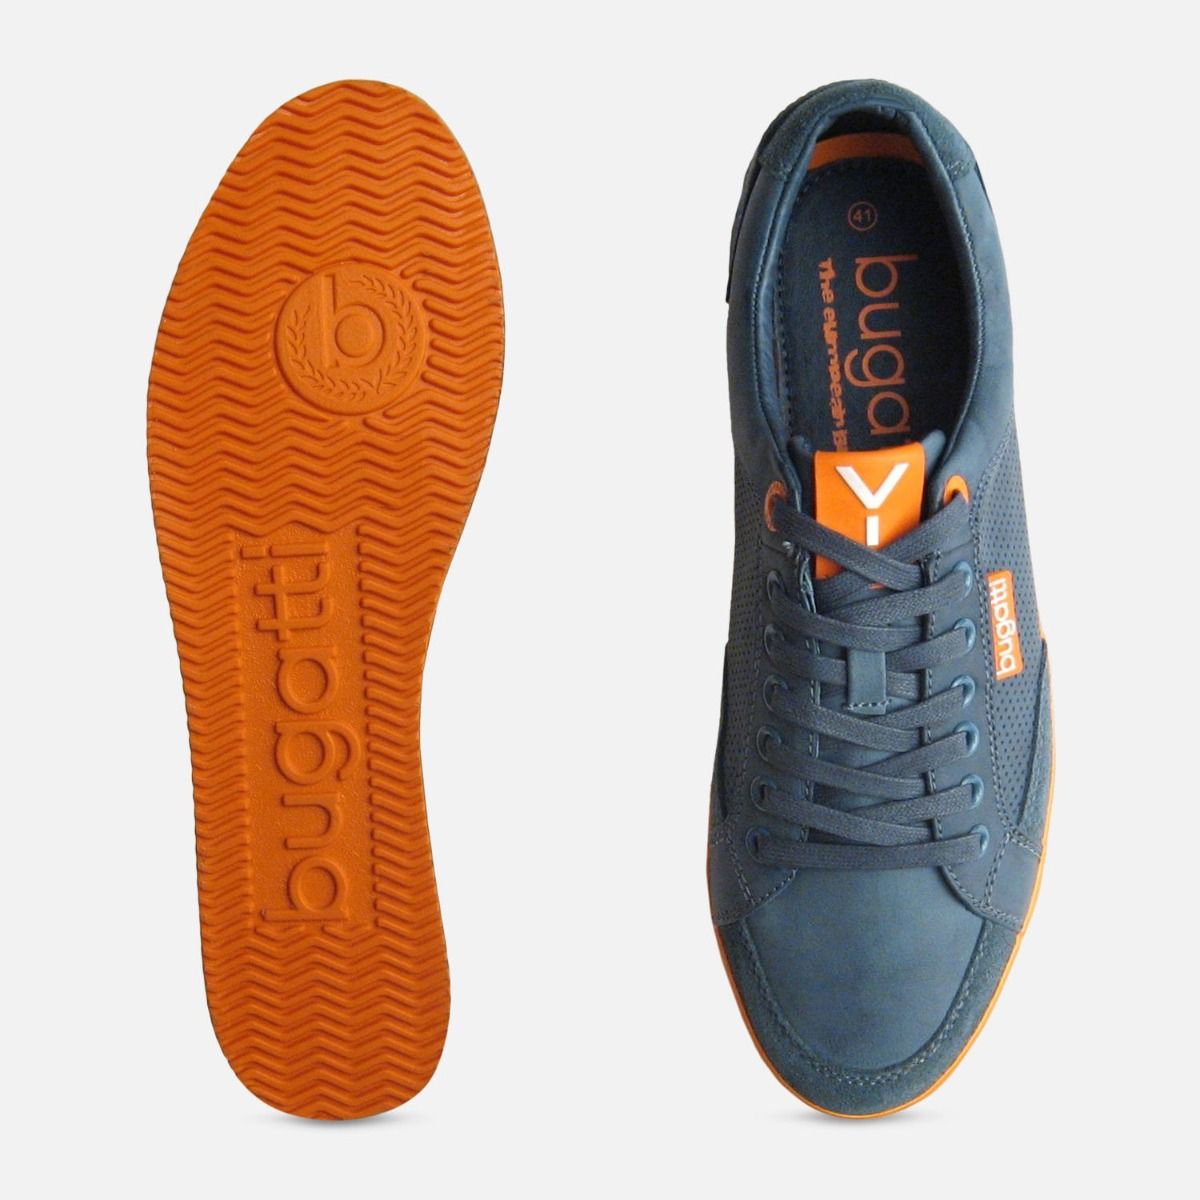 Trainers for Men, Designer Trainers & Sneakers